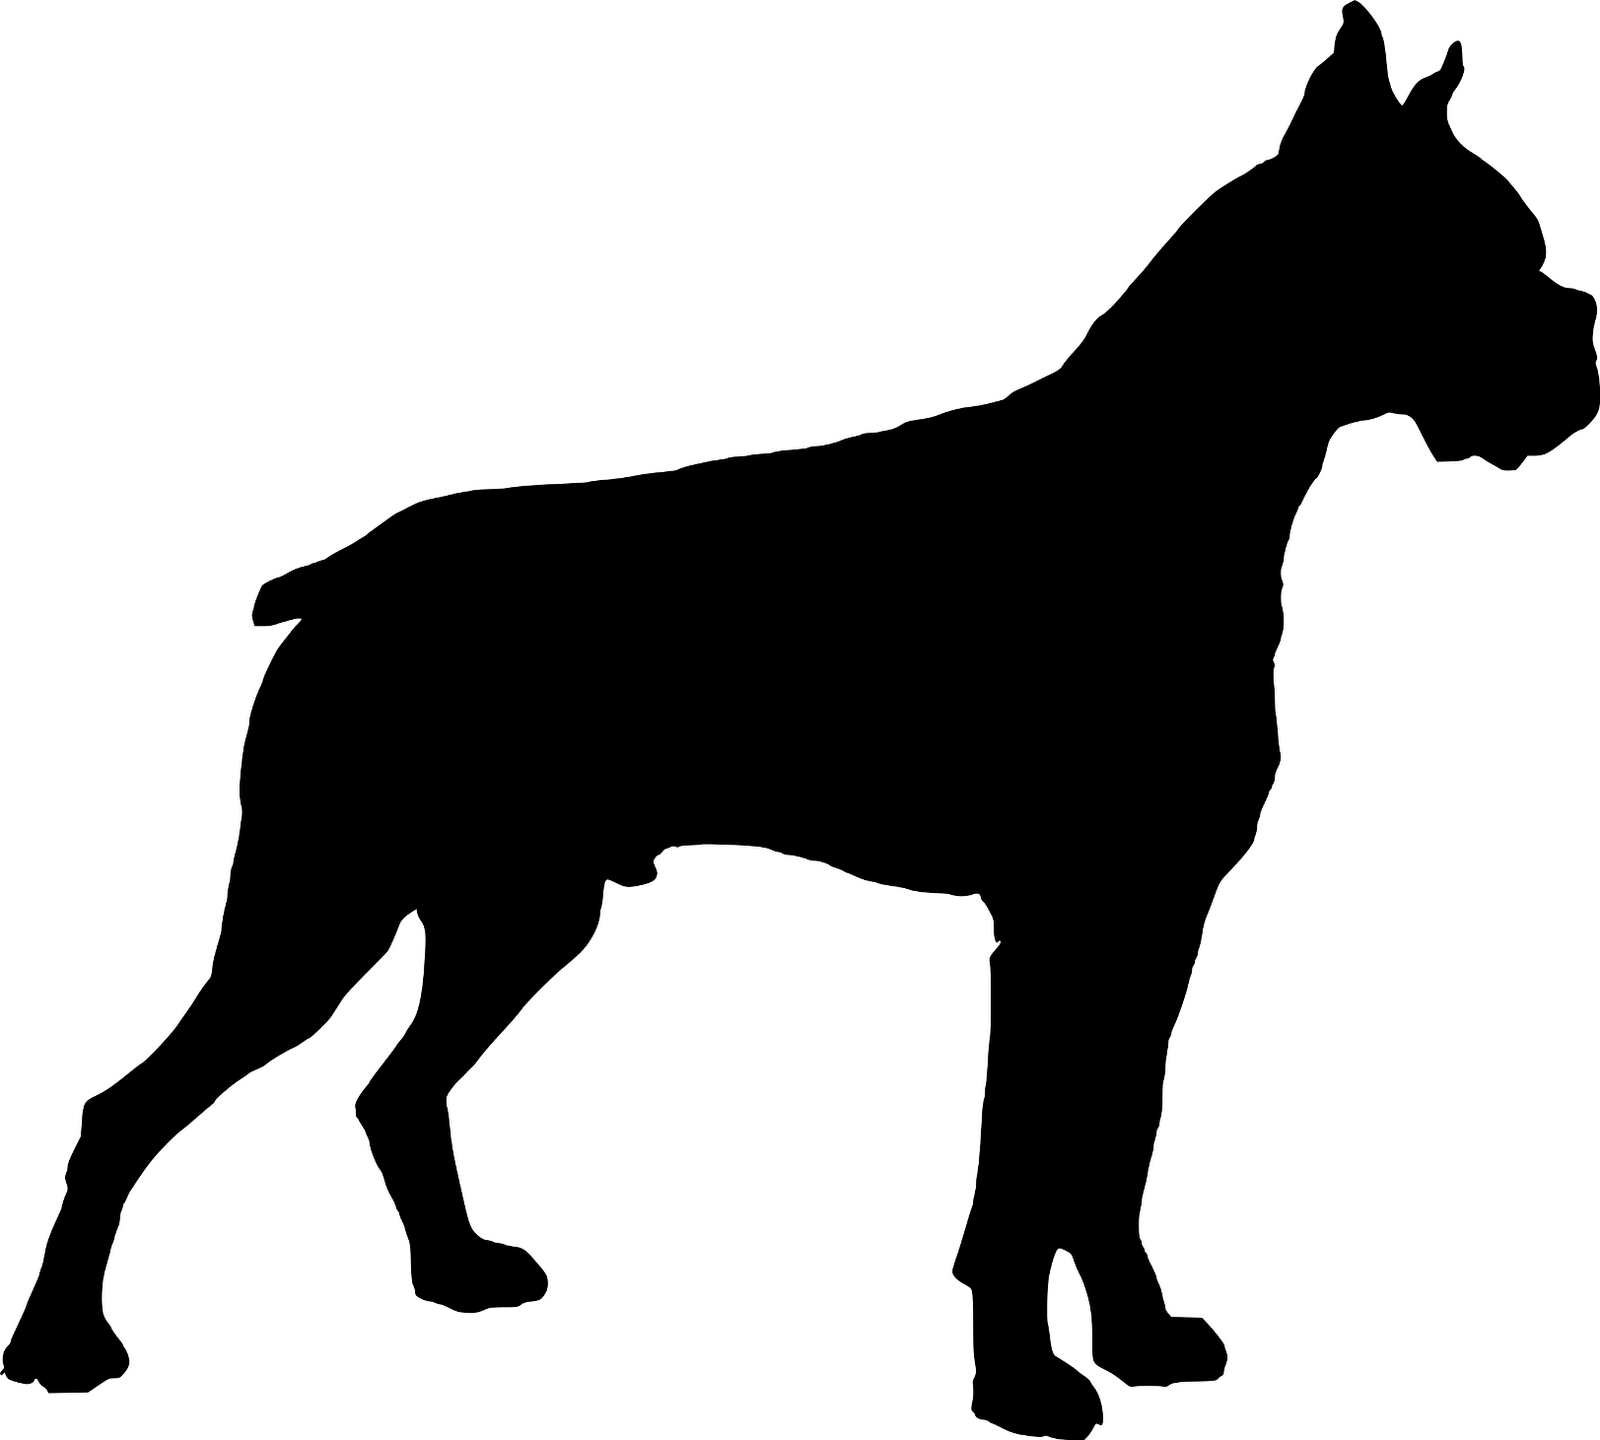 Boxer Dog Silhouette With Words - Clipart library